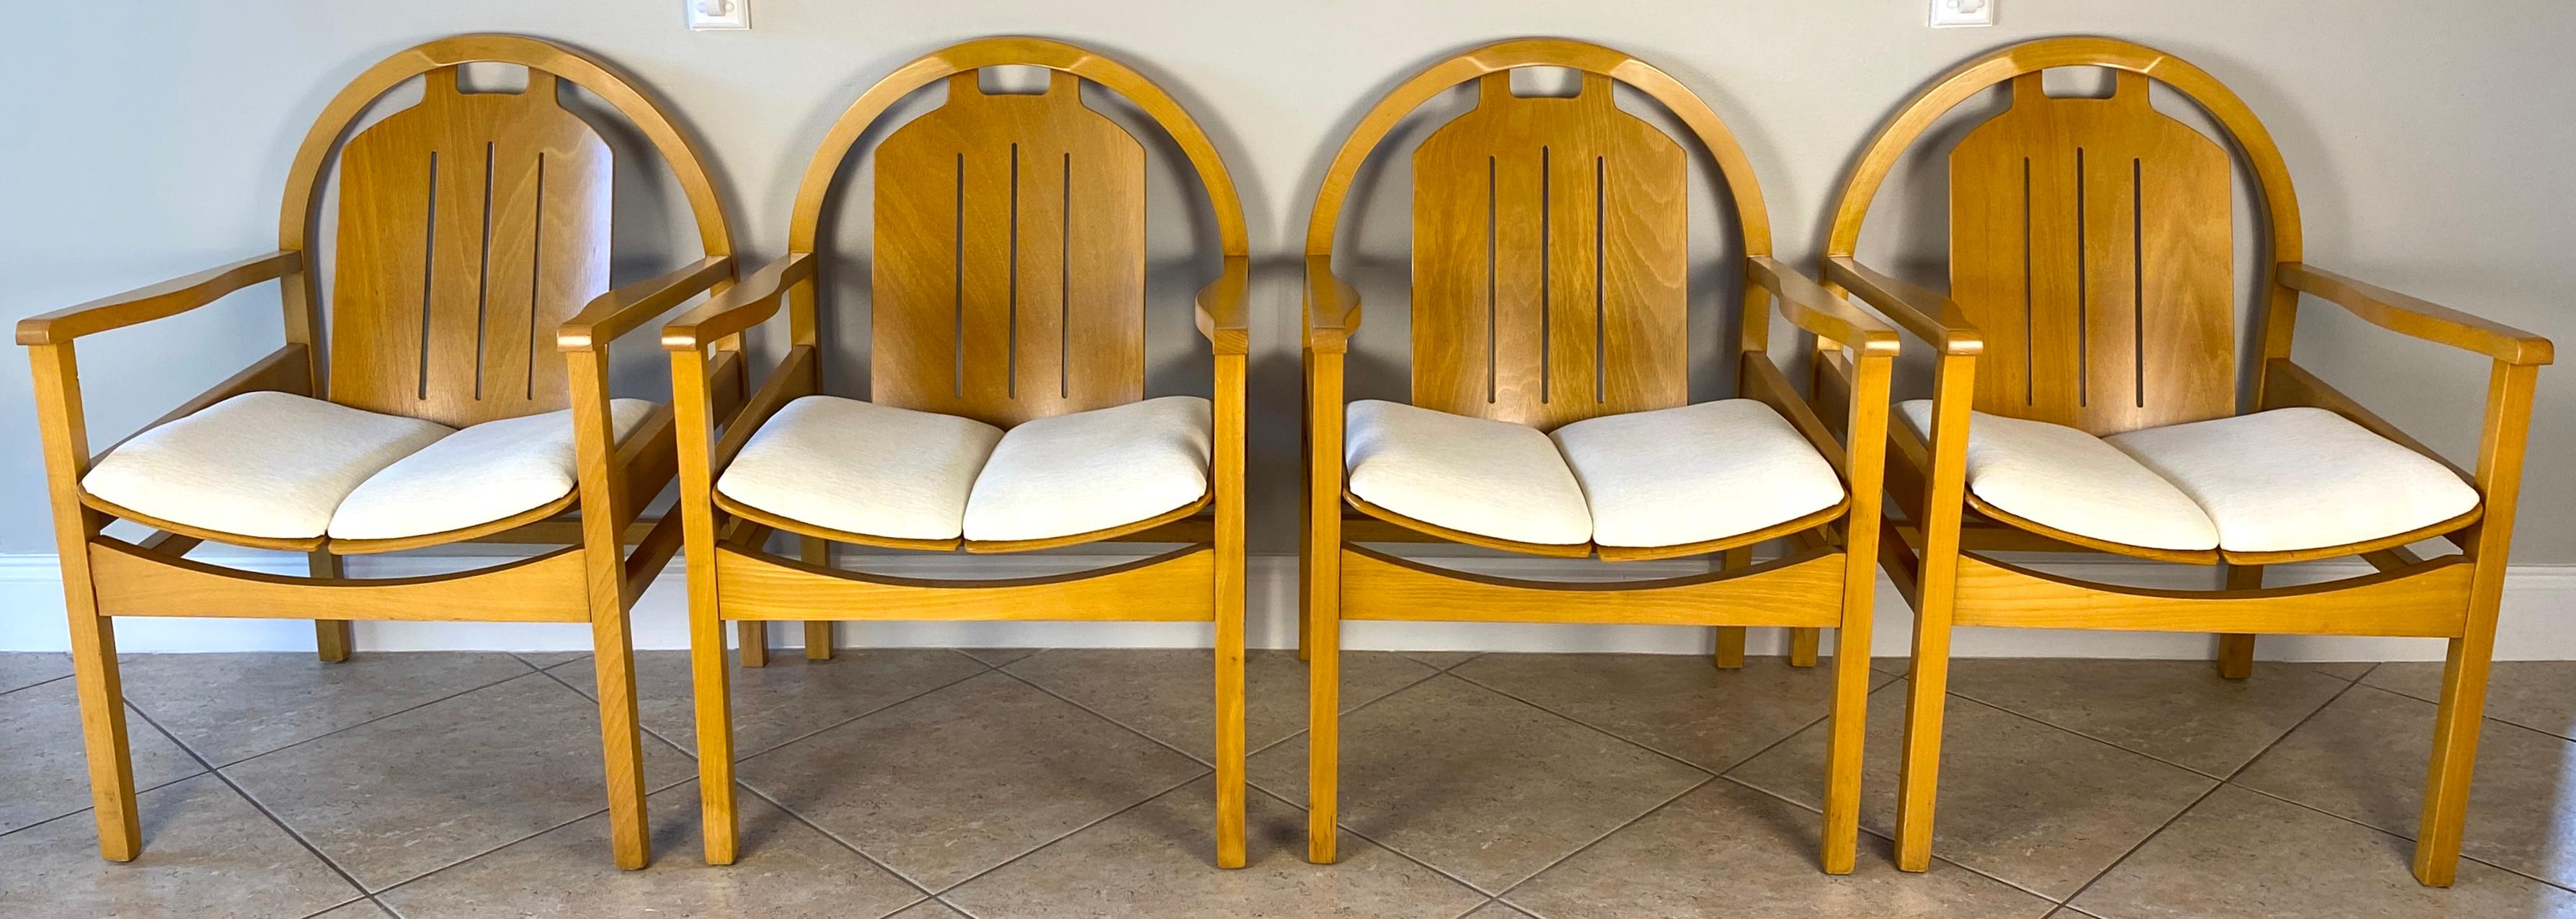 Pair of Modern Armchairs Beechwood + Fabric by Baumann Argos Lounge Chairs  In Good Condition For Sale In Miami, FL